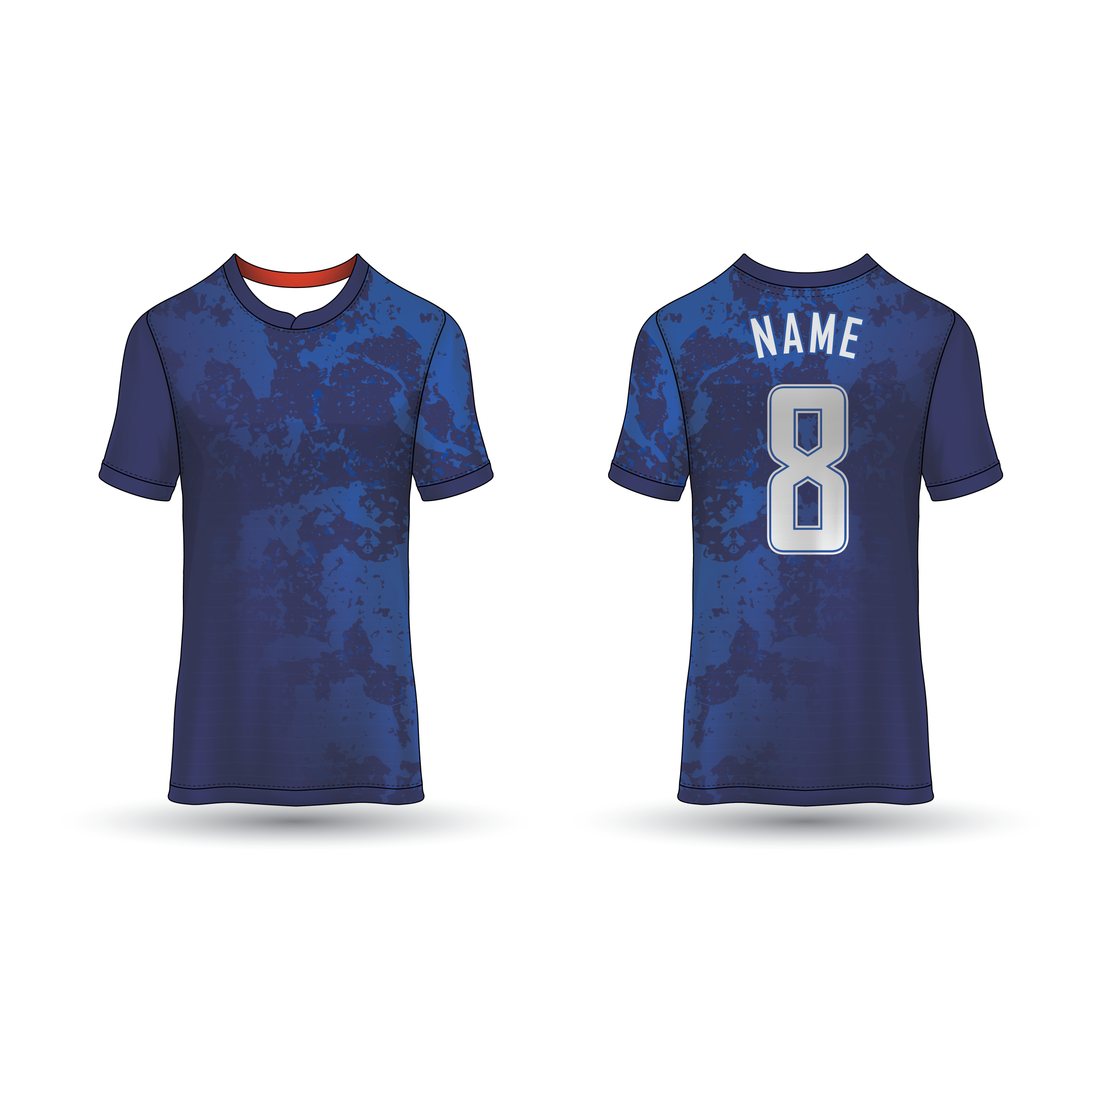 NEXT PRINT All Over Printed Customized Sublimation T-Shirt Unisex Sports Jersey Player Name & Number, Team Name NP50000227